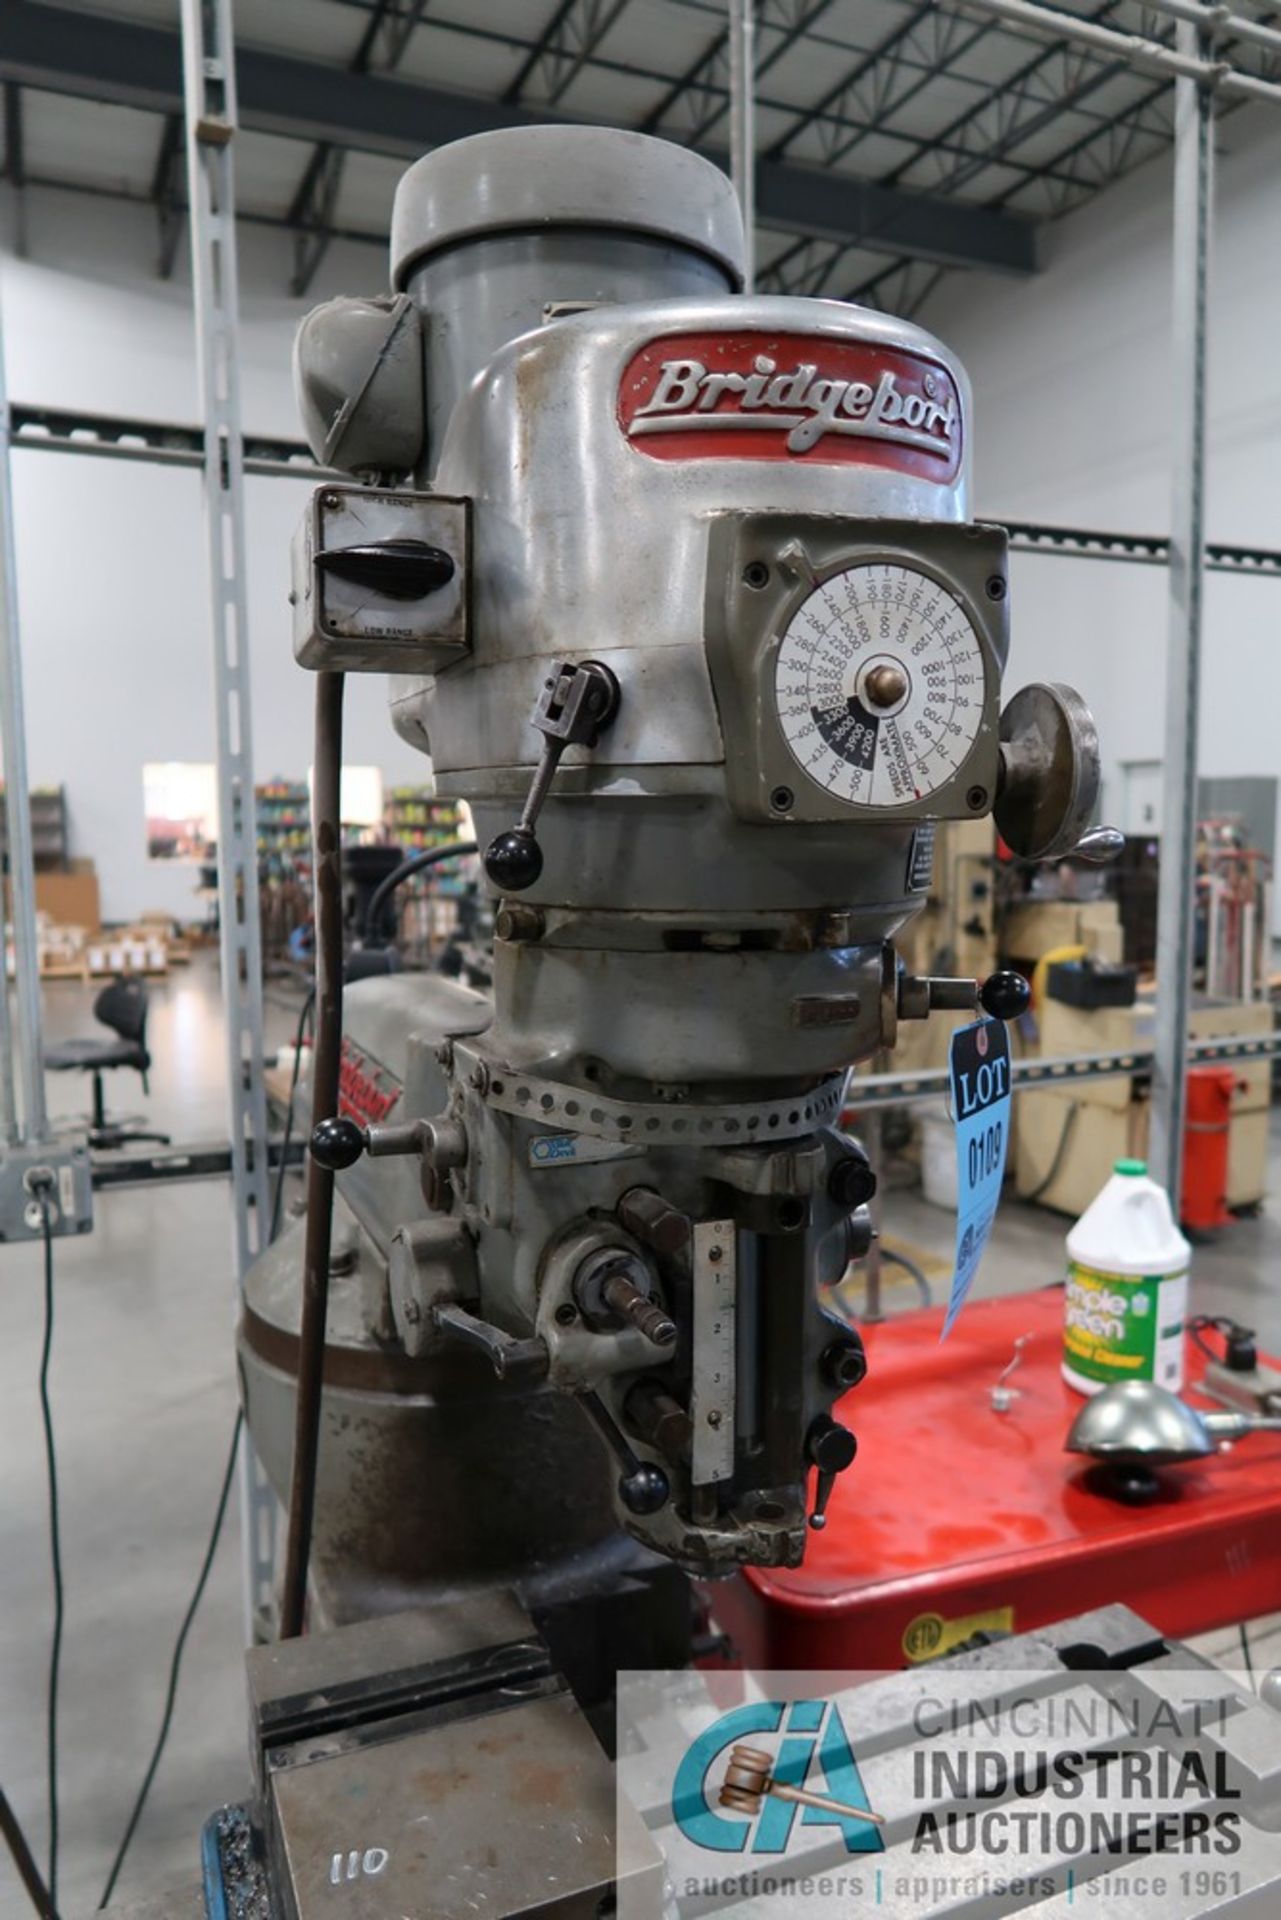 1-1/2 HP BRIDGEPORT VERTICAL MILL; S/N 122890, 9" X 42" TABLE, 60-4,200 RPM SPINDLE SPEED - Image 3 of 6